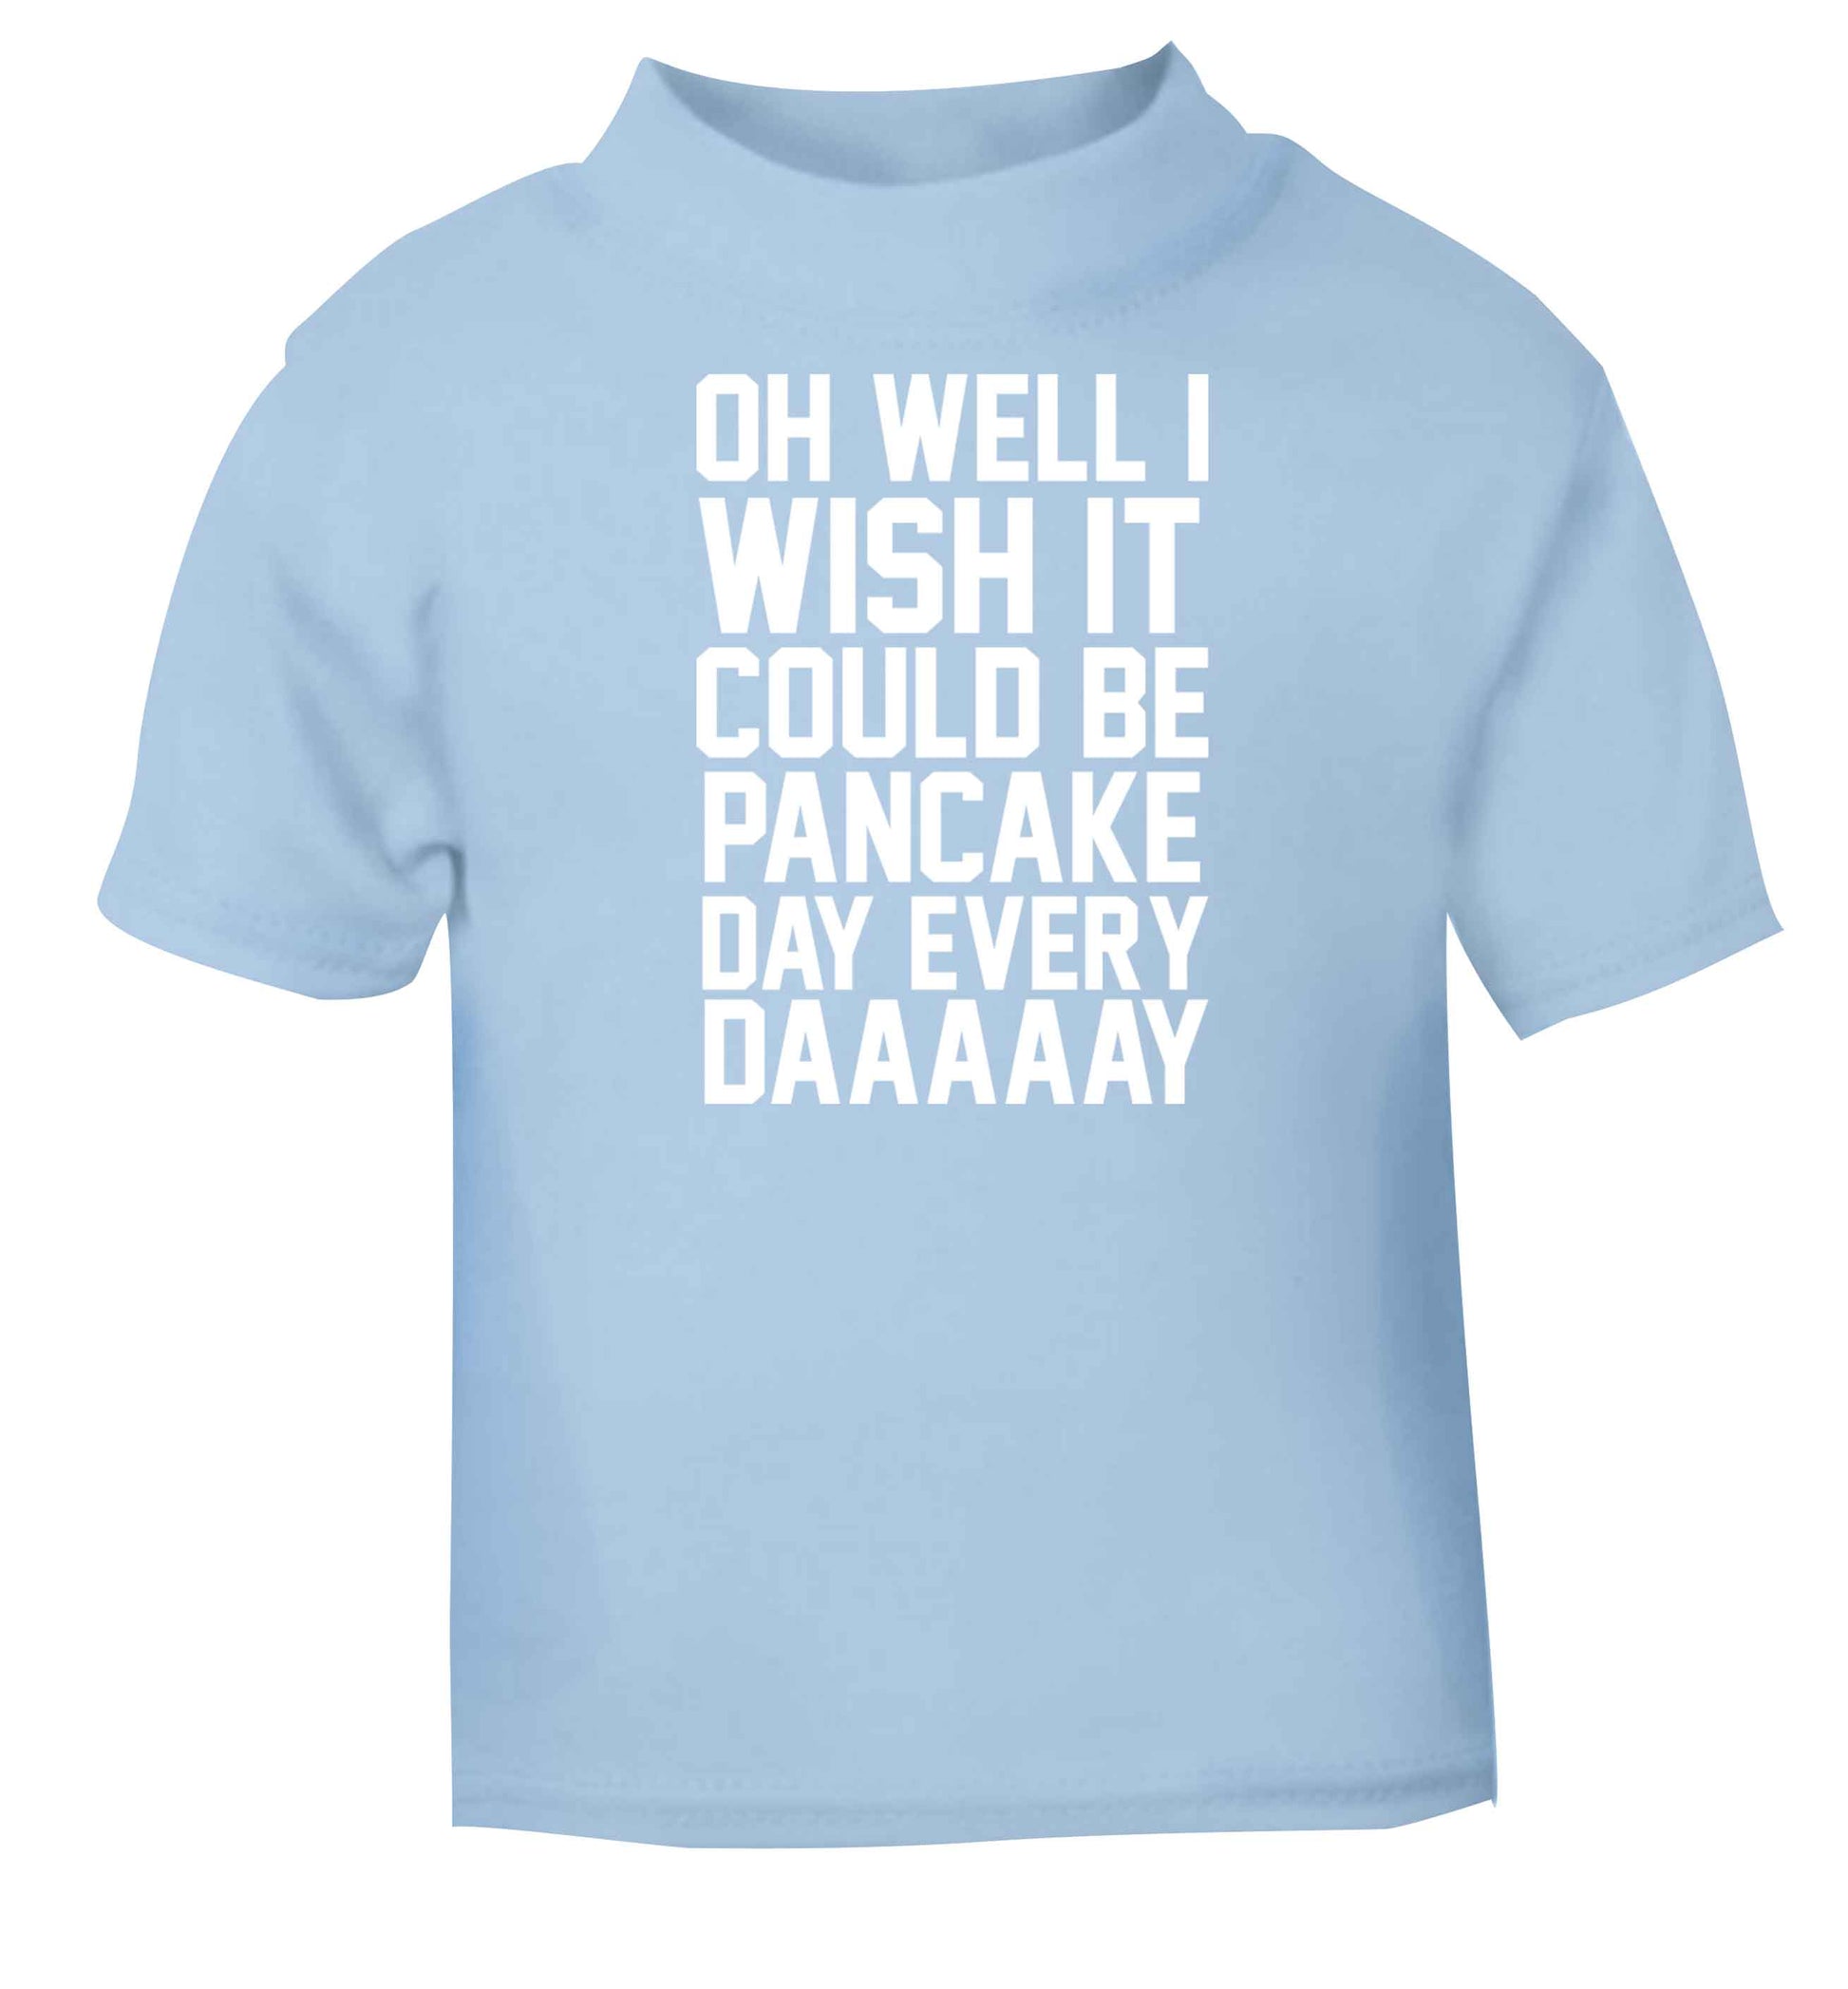 Oh well I wish it could be pancake day every day light blue baby toddler Tshirt 2 Years